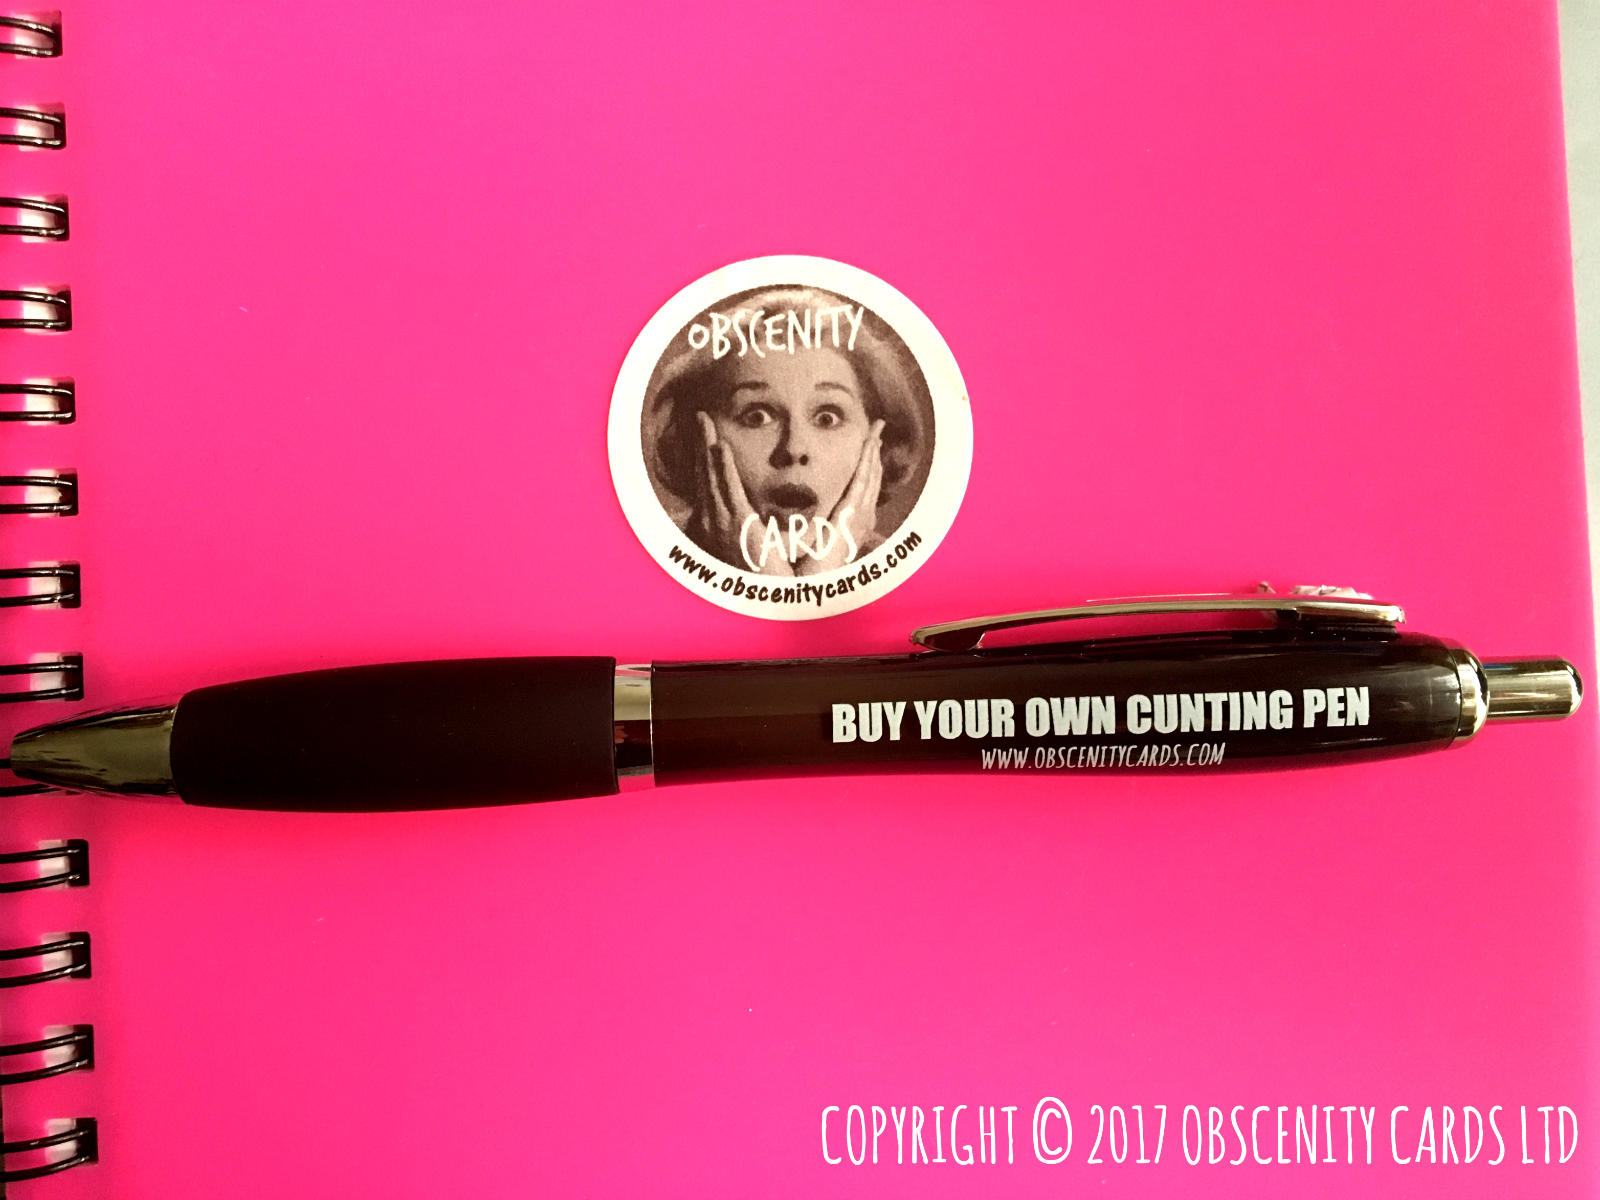 Funny Obscene Profanity Pens, buy your own cunting pen by Obscenity Cards